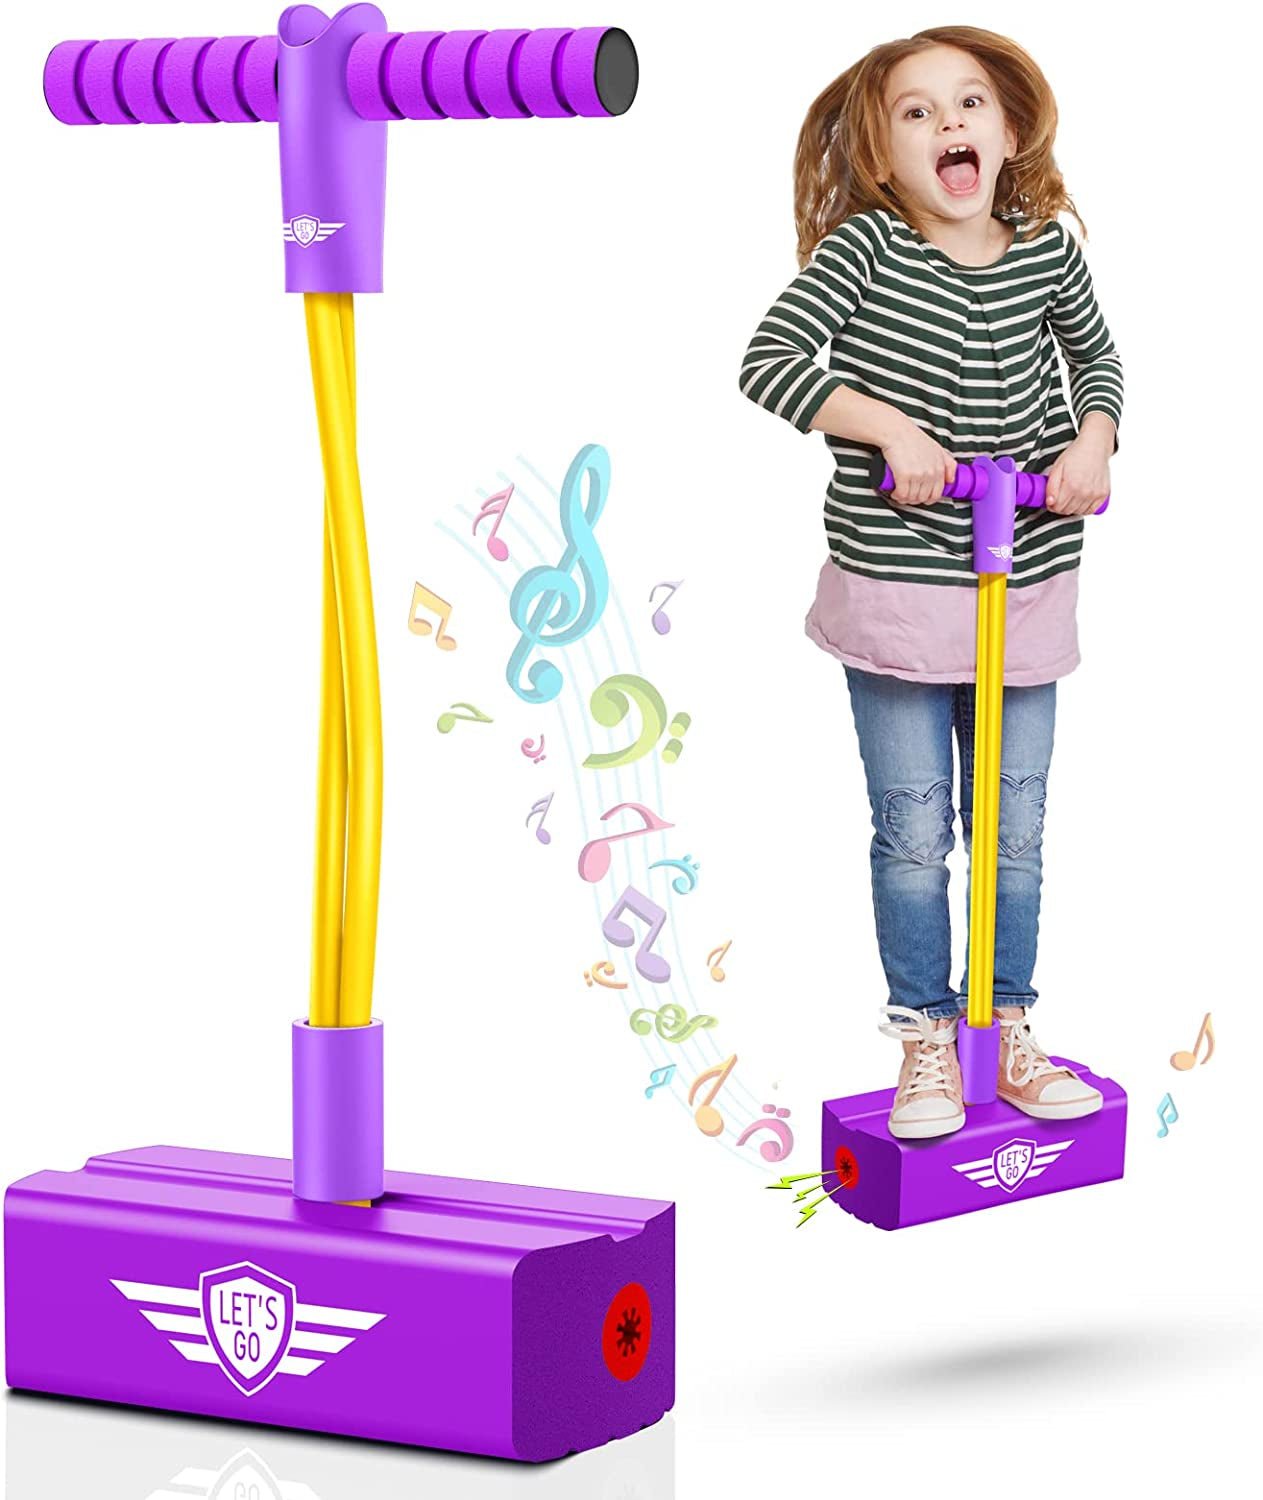 Foam Pogo Stick for Boys Girls - Five Times Stretch Safe and Fun Gifts for Kids Indoor/Outdoor/Garden Toys Games - FoxMart™️ - Toyzey